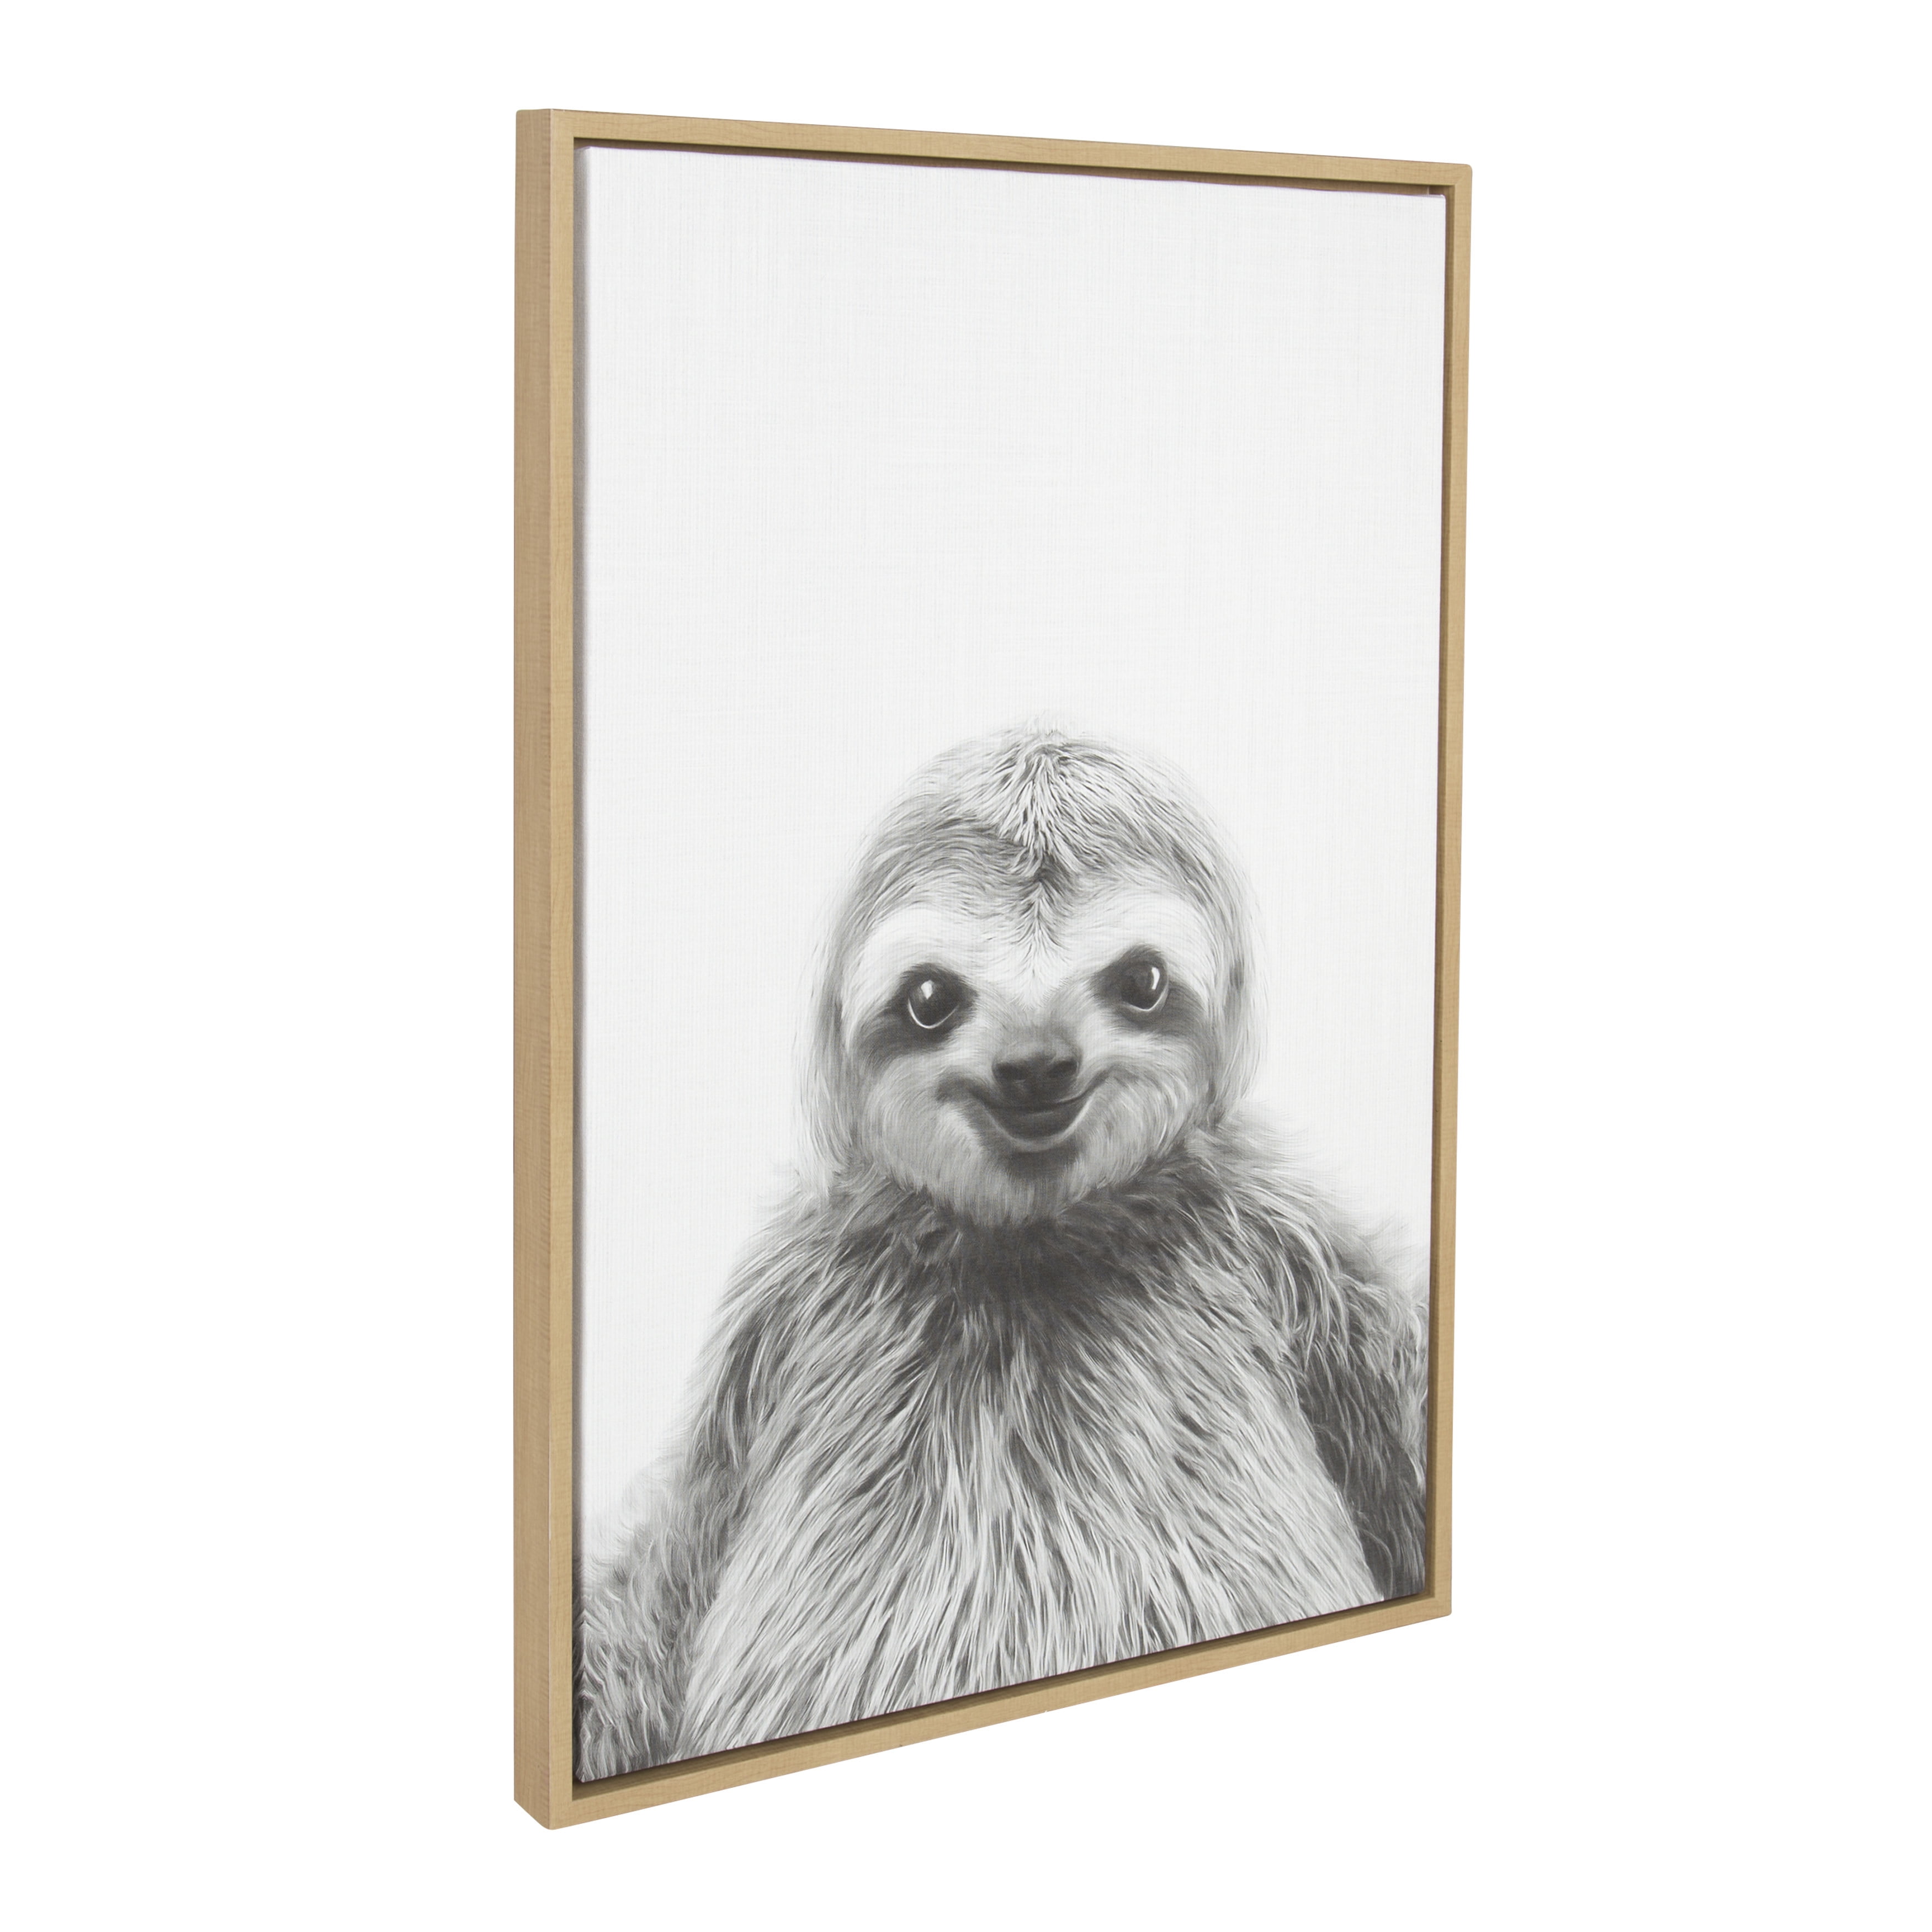 Kate and Laurel Sylvie Sloth Animal Print Black and White Portrait Framed  Canvas Wall Art by Simon Te Tai, 23x33 Natural